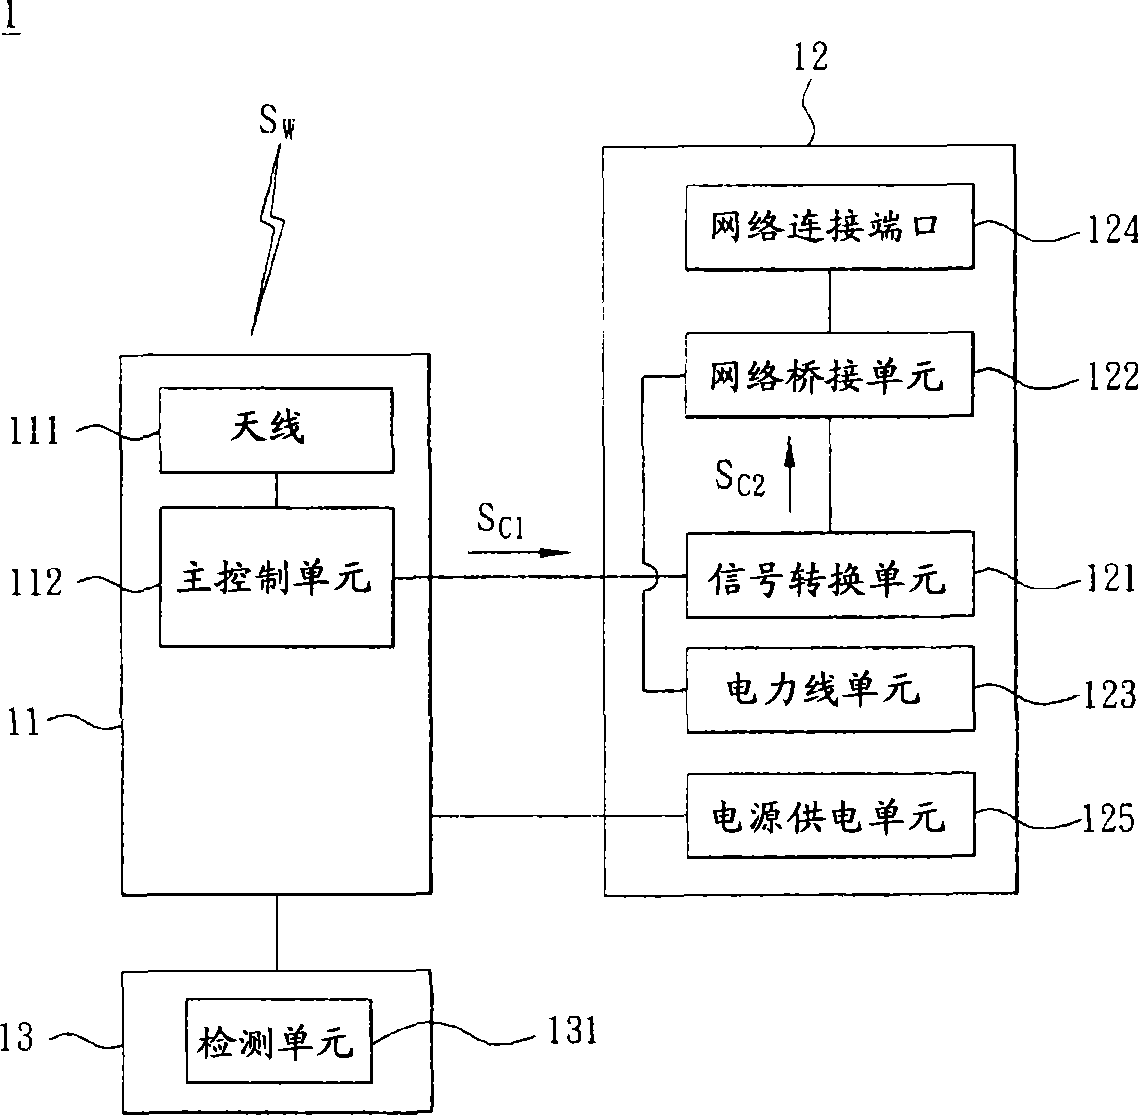 Bridging apparatus for electric power network